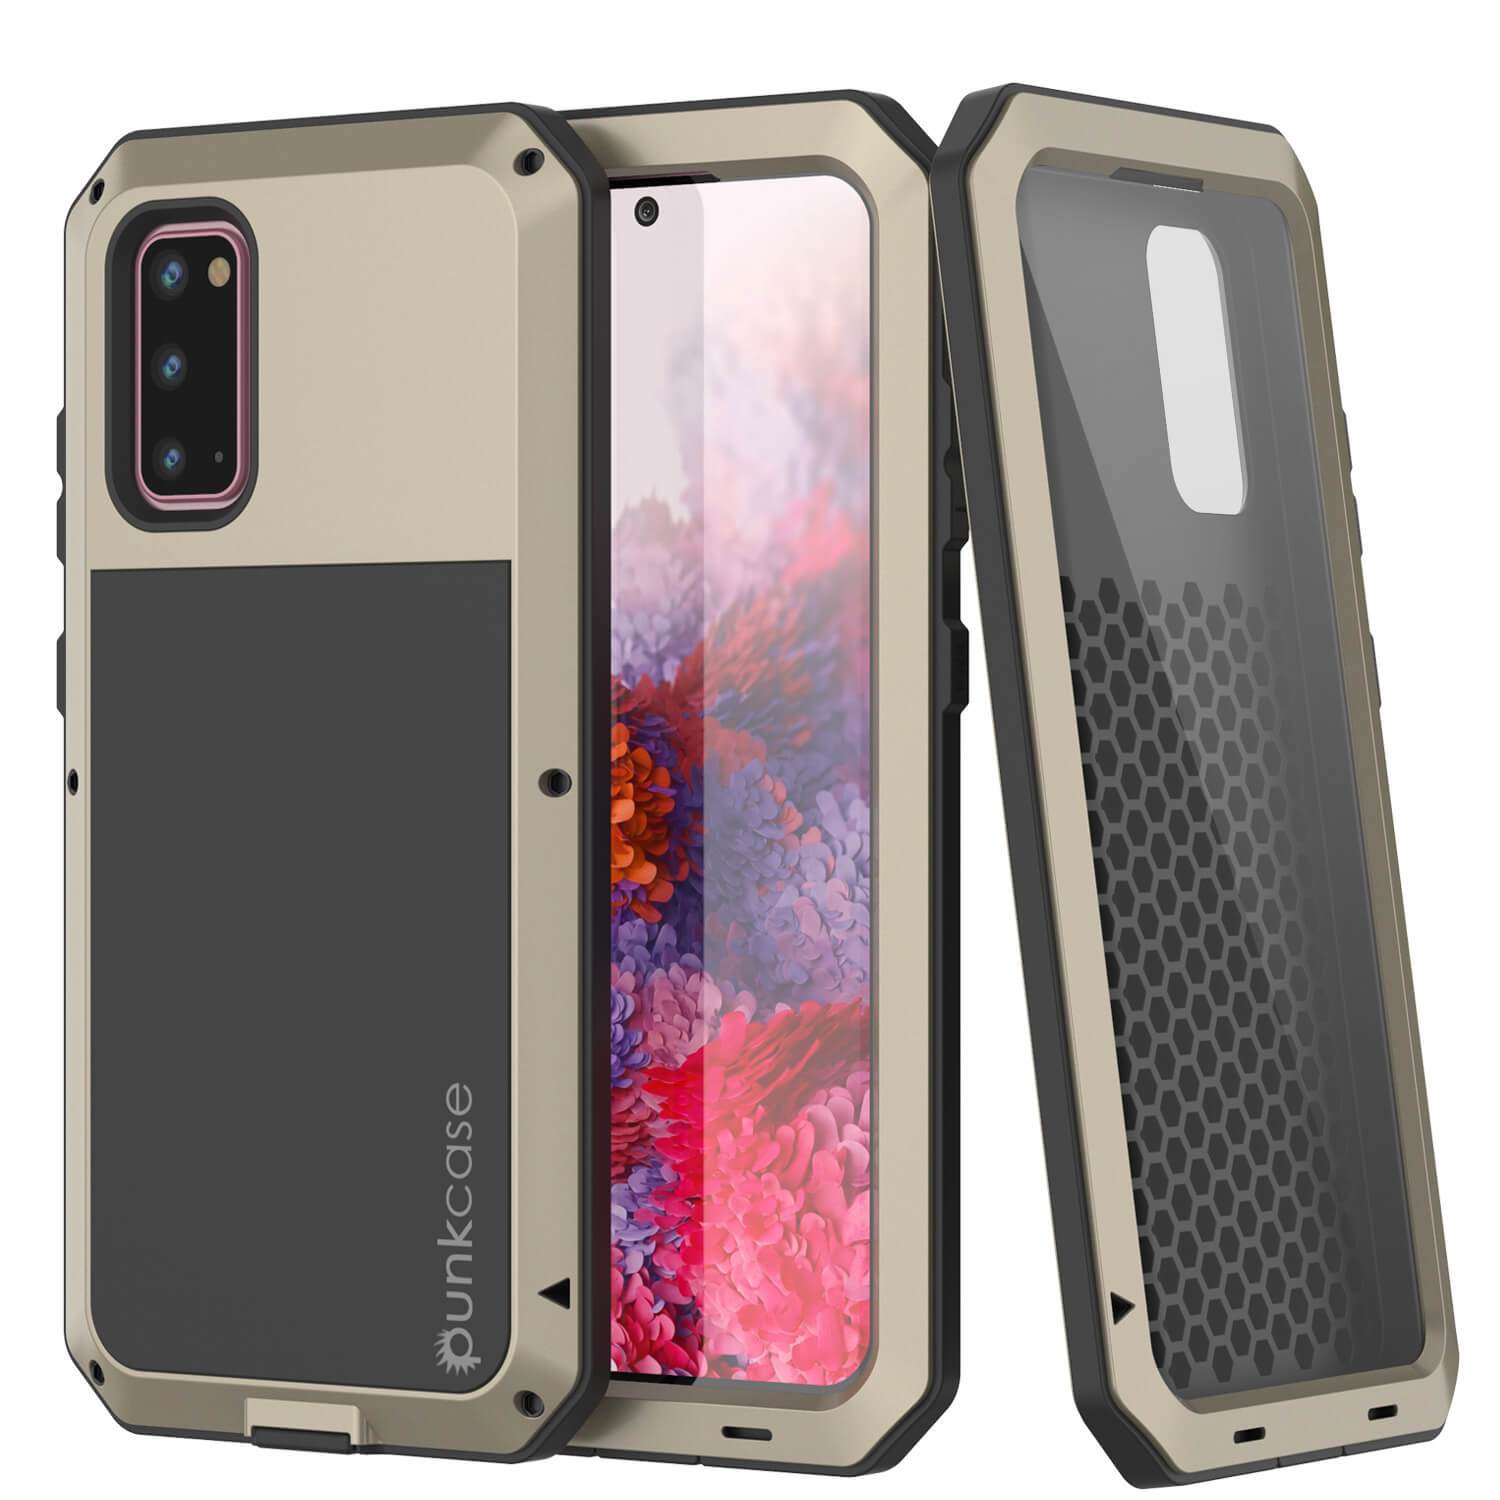 Galaxy s20 Metal Case, Heavy Duty Military Grade Rugged Armor Cover [Gold]